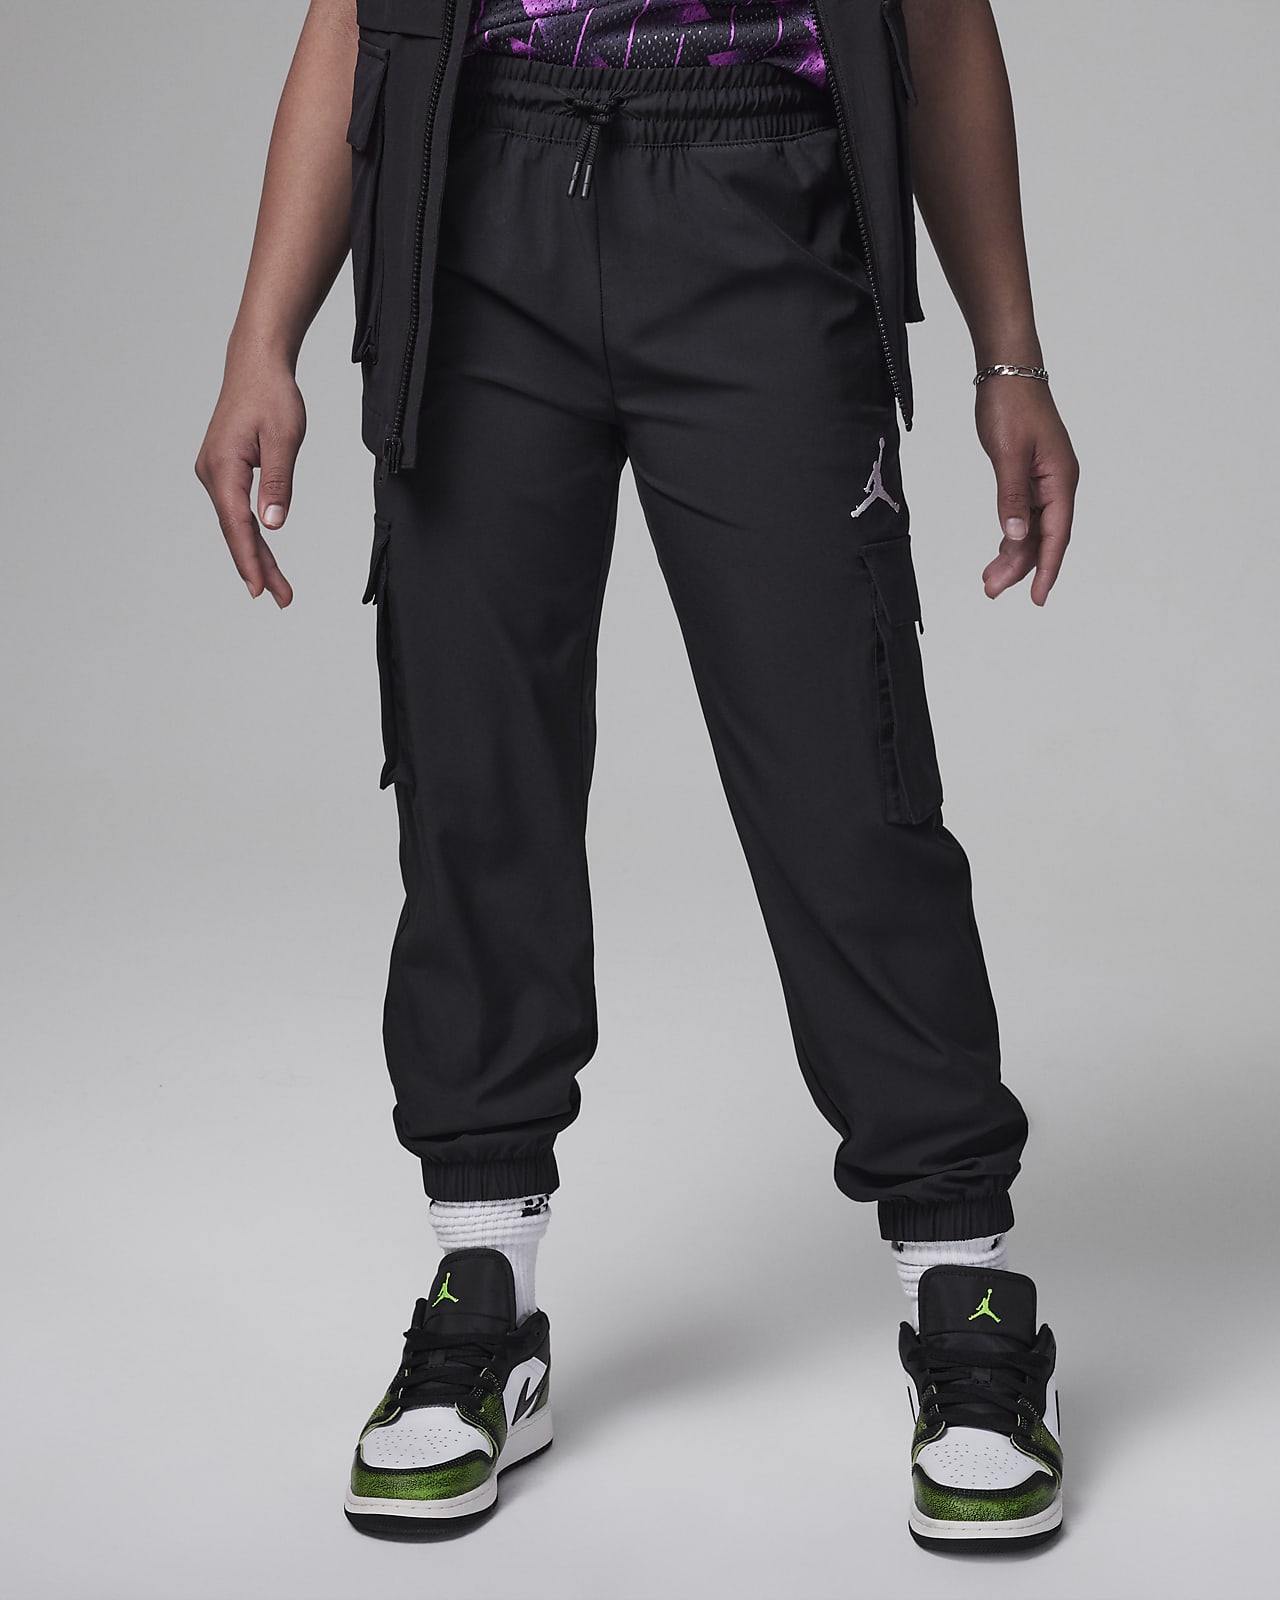 Find more Up & Up Training Pants for sale at up to 90% off